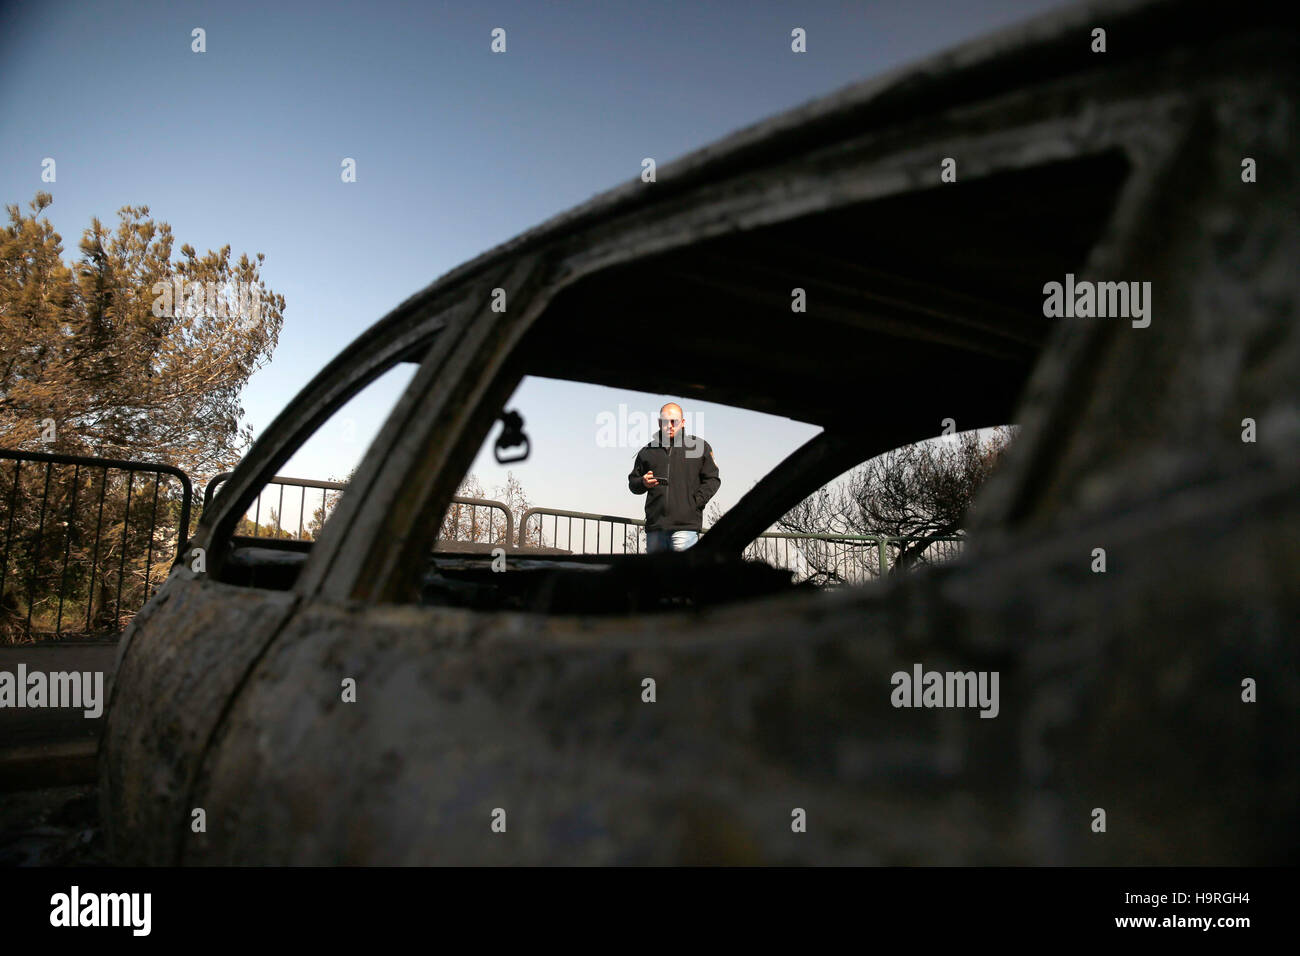 (161125) -- HAIFA (ISRAEL), Nov. 25, 2016 (Xinhua) -- A man looks at fire damaged cars in Haifa, Israel, on Nov. 25, 2016. Fires on Thursday forced a widespread evacuation in Haifa, as foreign countries sent in firefighting planes to help put out a three-day wave of forest fires throughout Israel. (Xinhua/JINI/Daniel Bar) Stock Photo